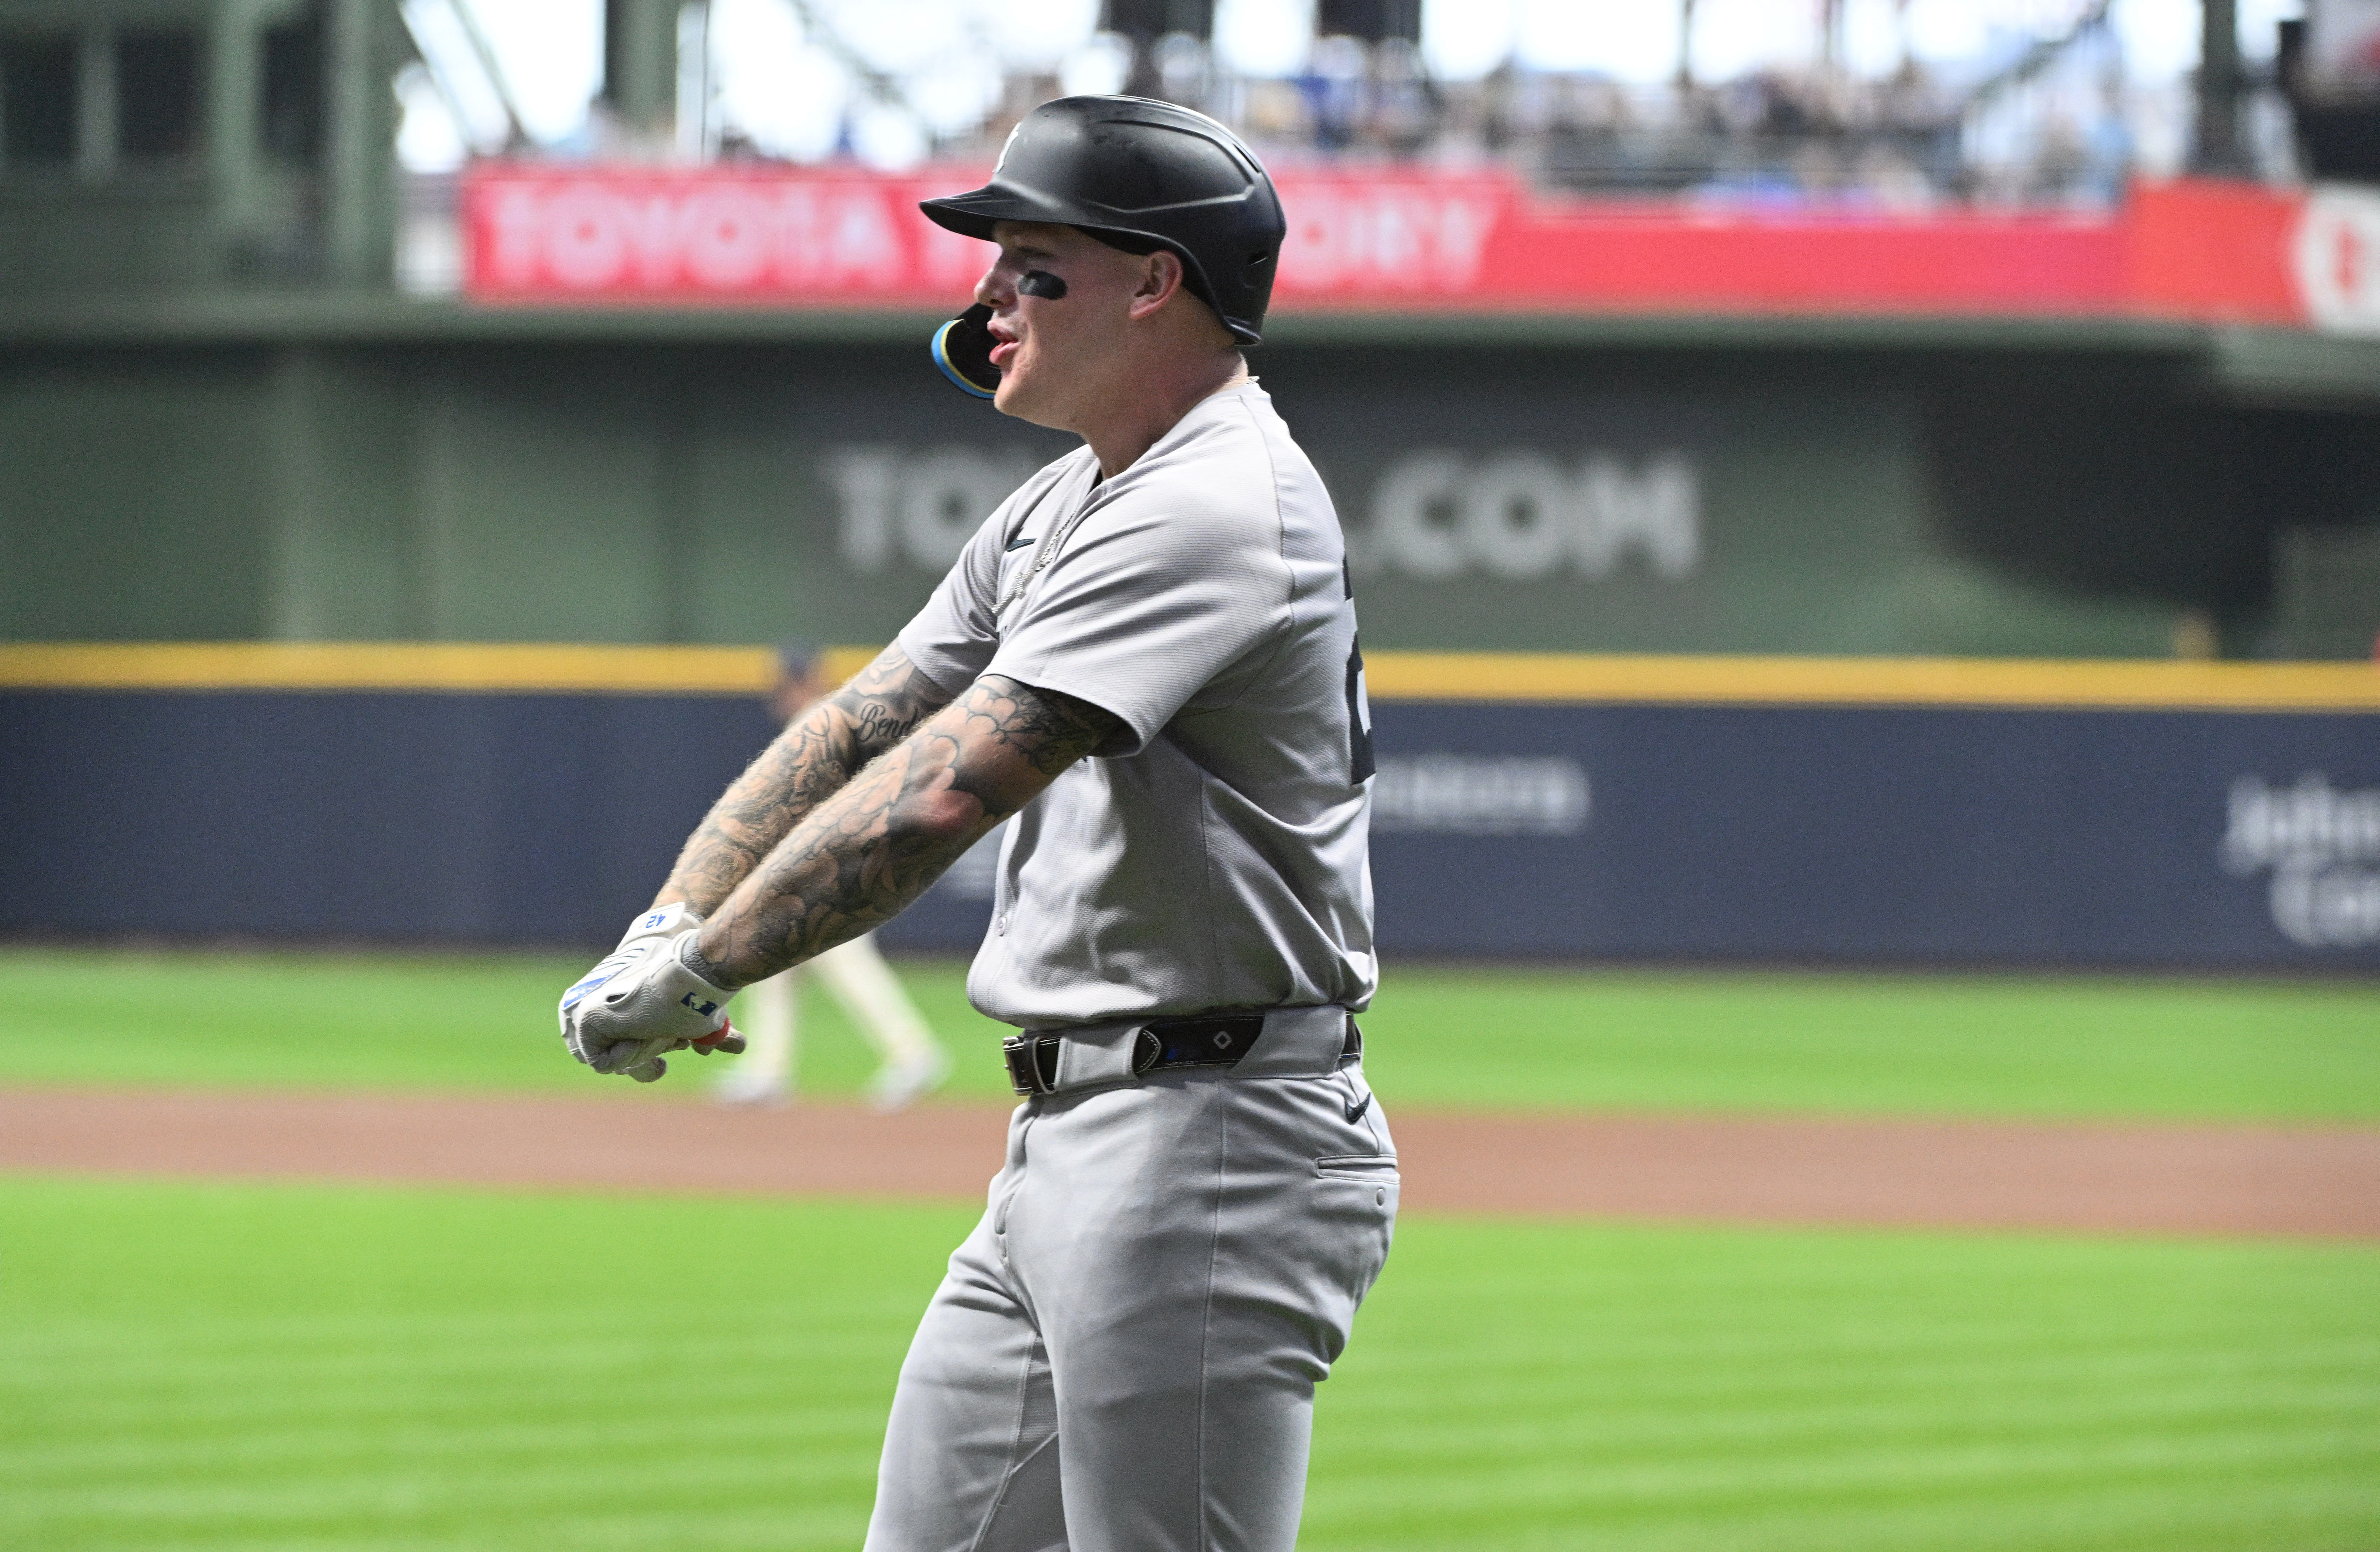 Alex Verdugo is fitting in nicely with the New York Yankees